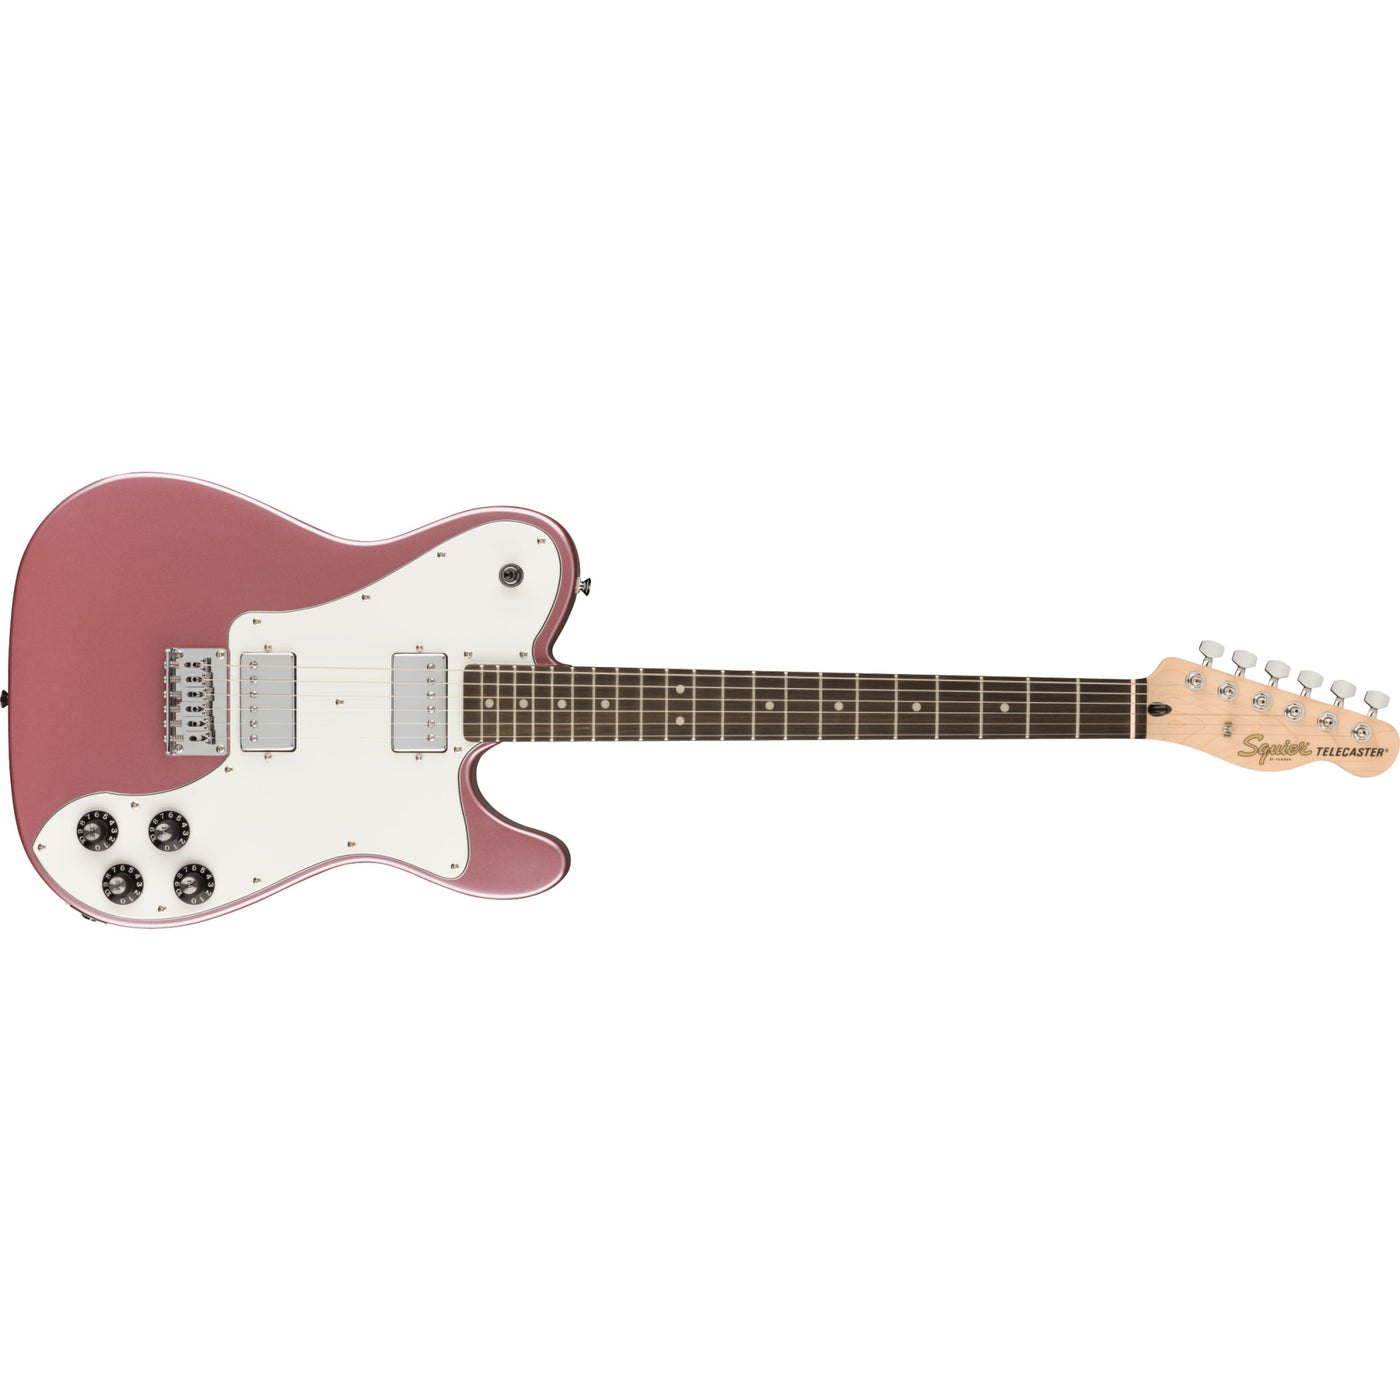 Fender Affinity Series Telecaster Deluxe Electric Guitar, Burgundy Mist (0378250566)